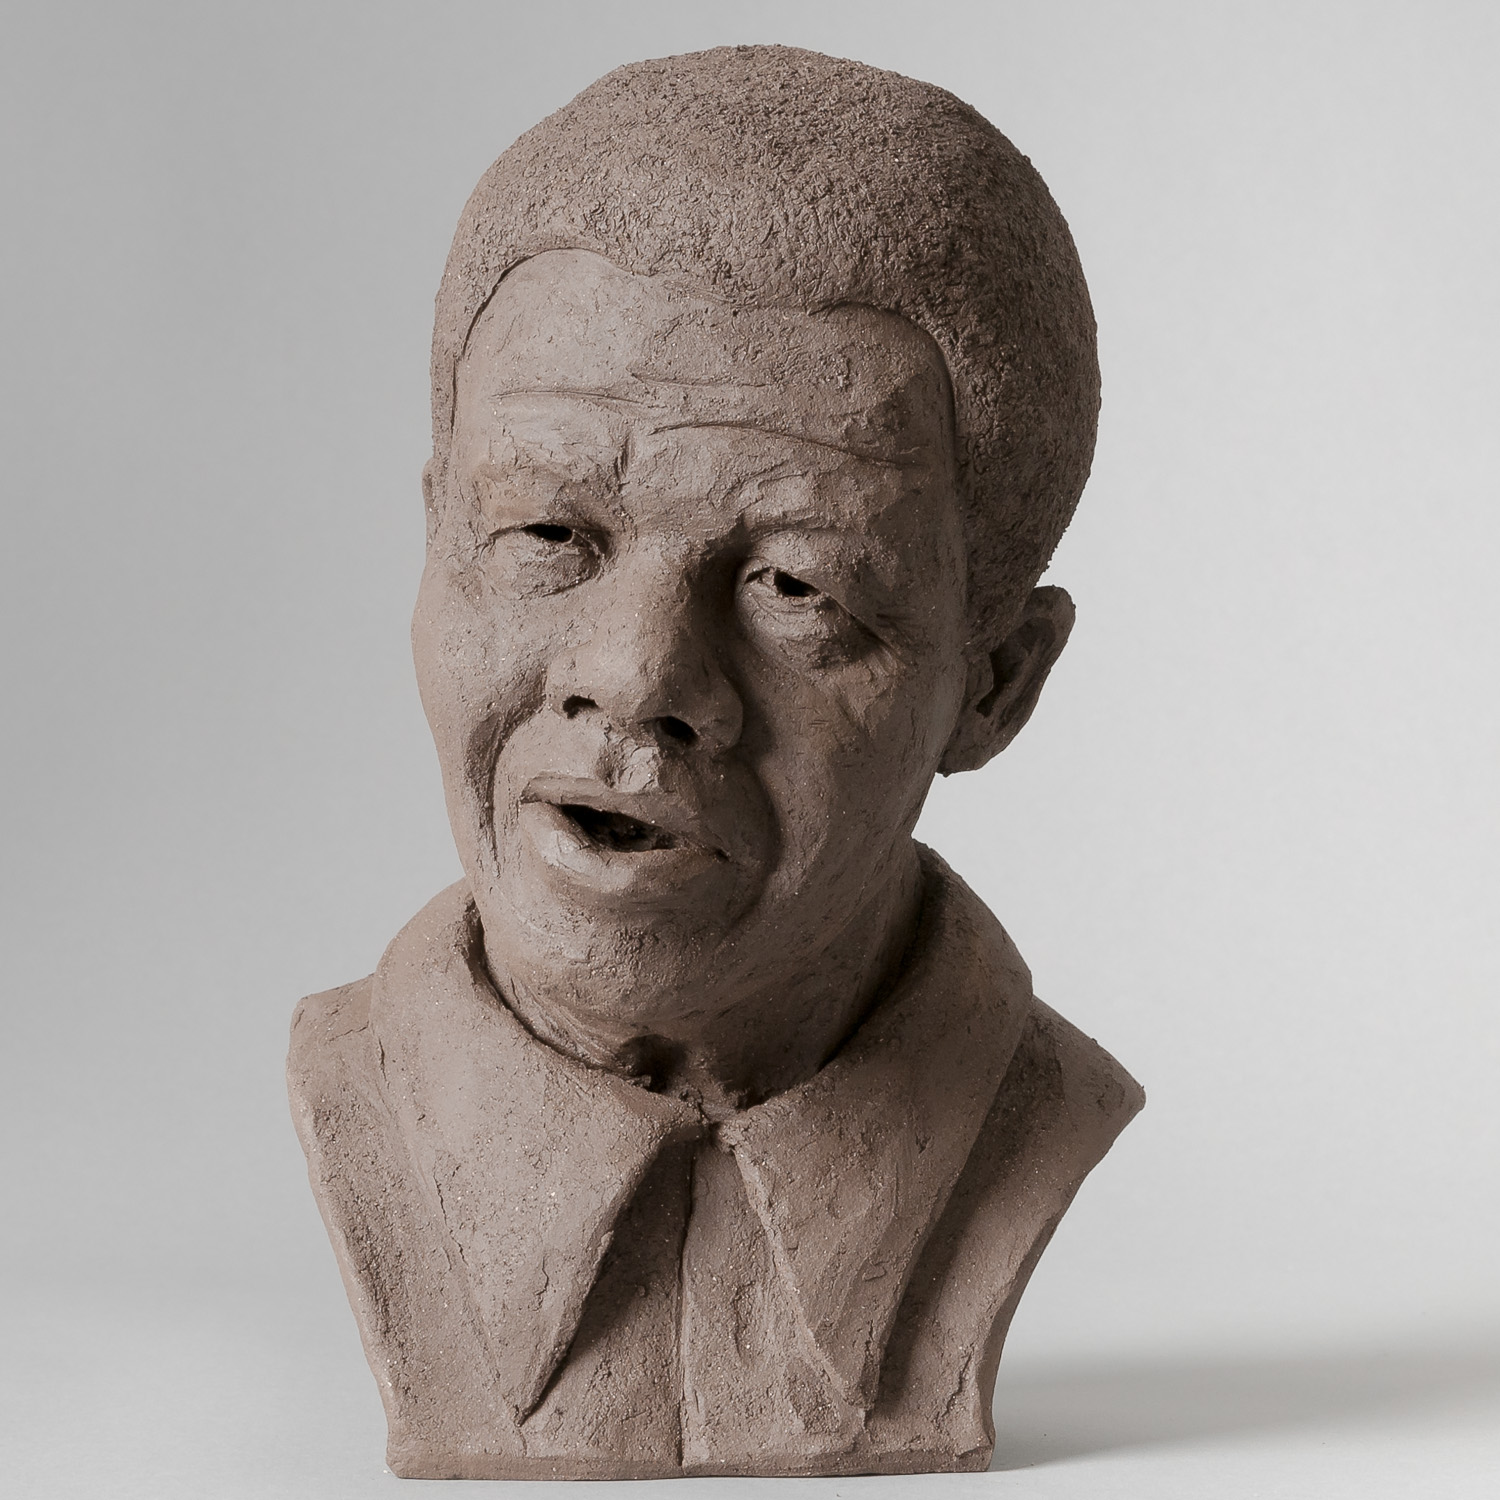 Sketch for a monument of Nelson Mandela